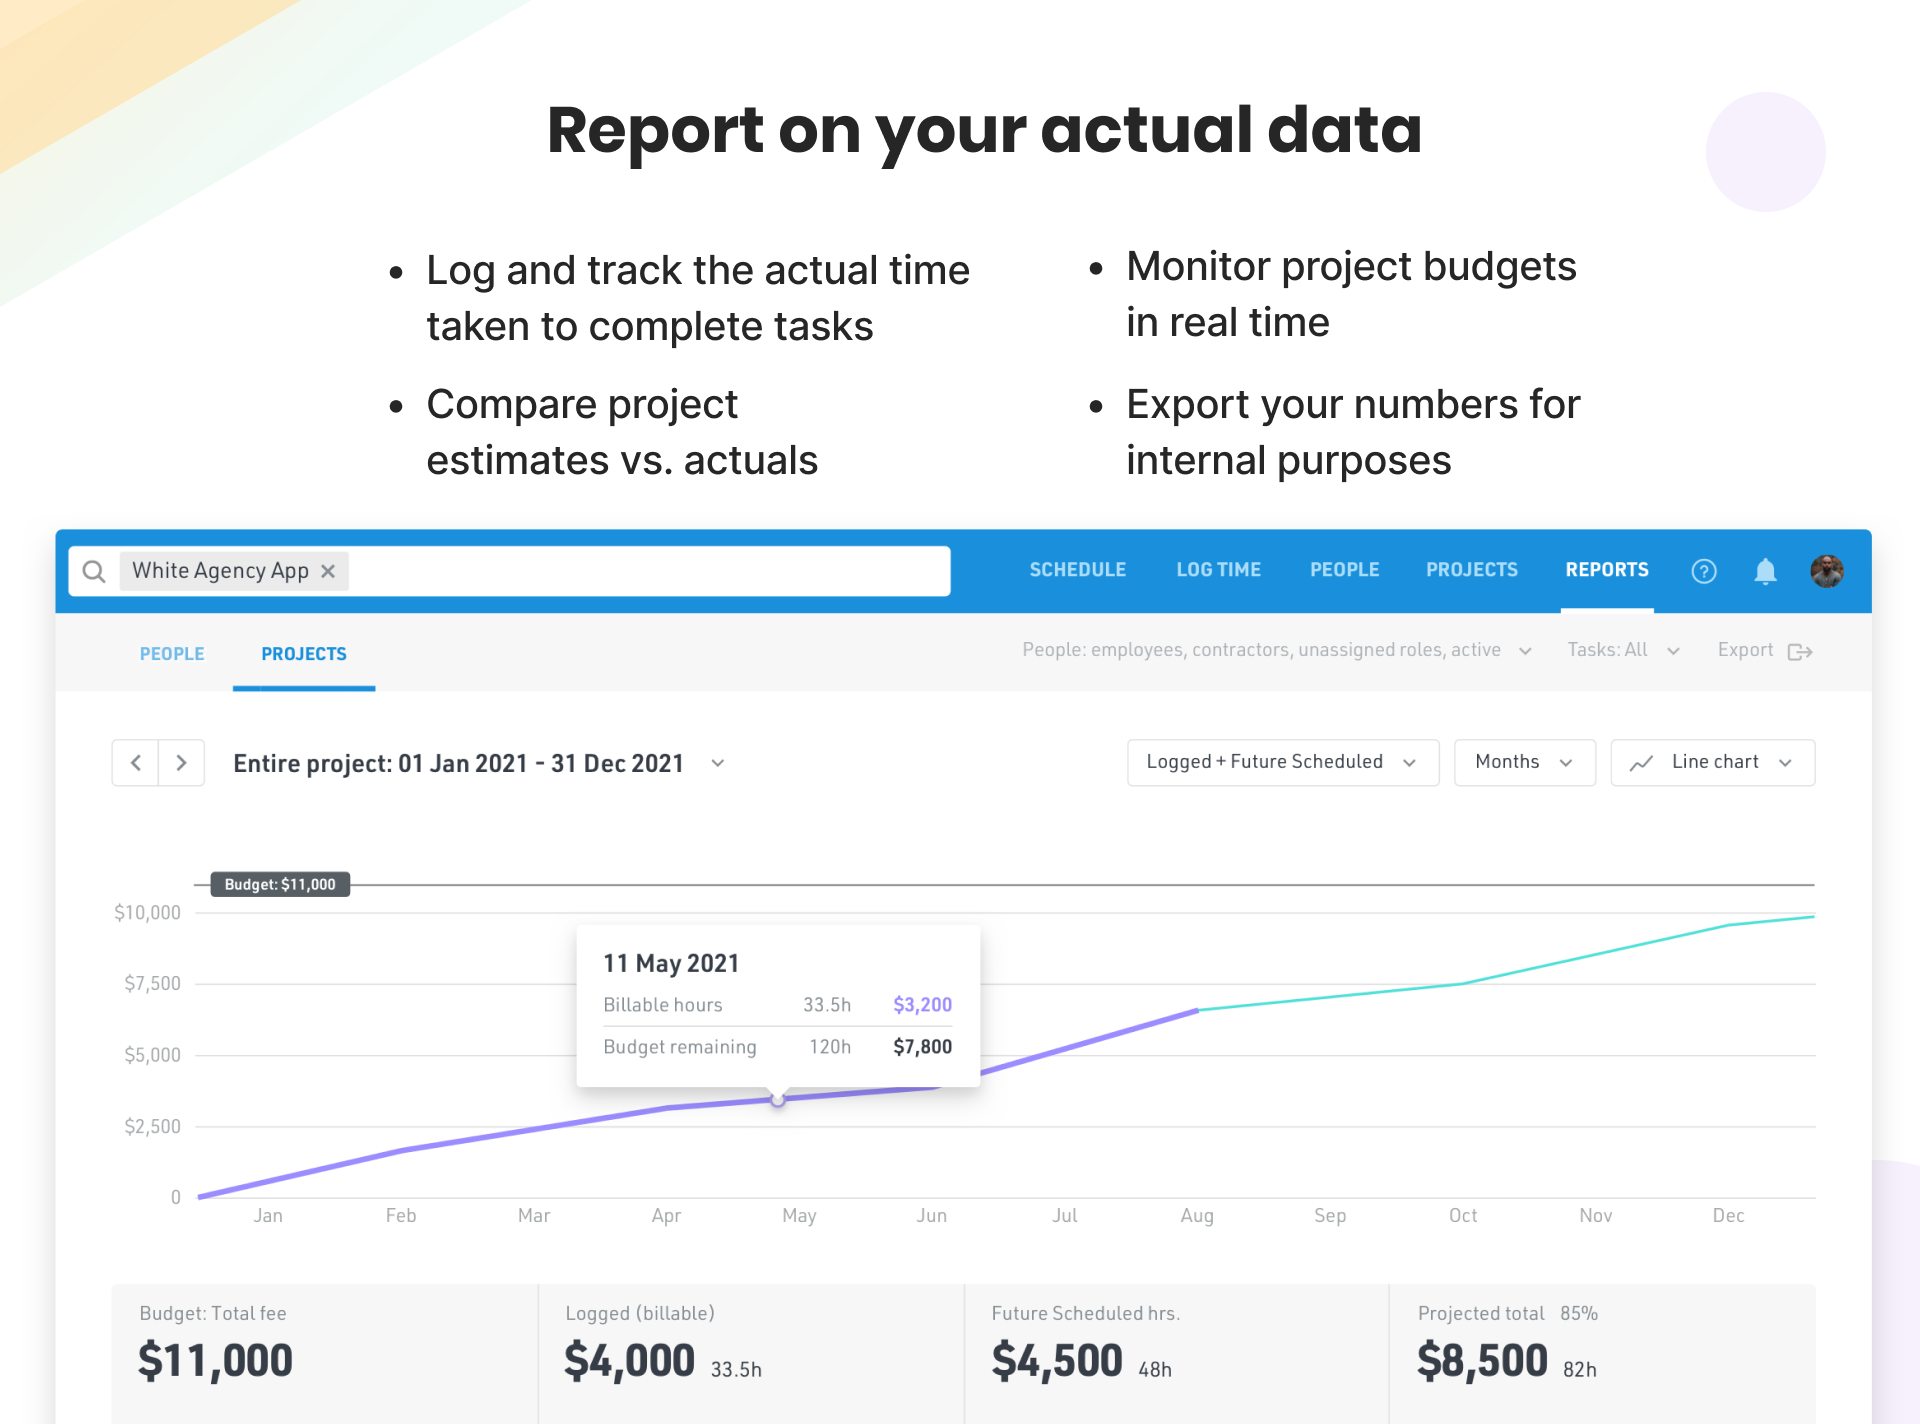 Track your team's actual time to monitor progress and budgets